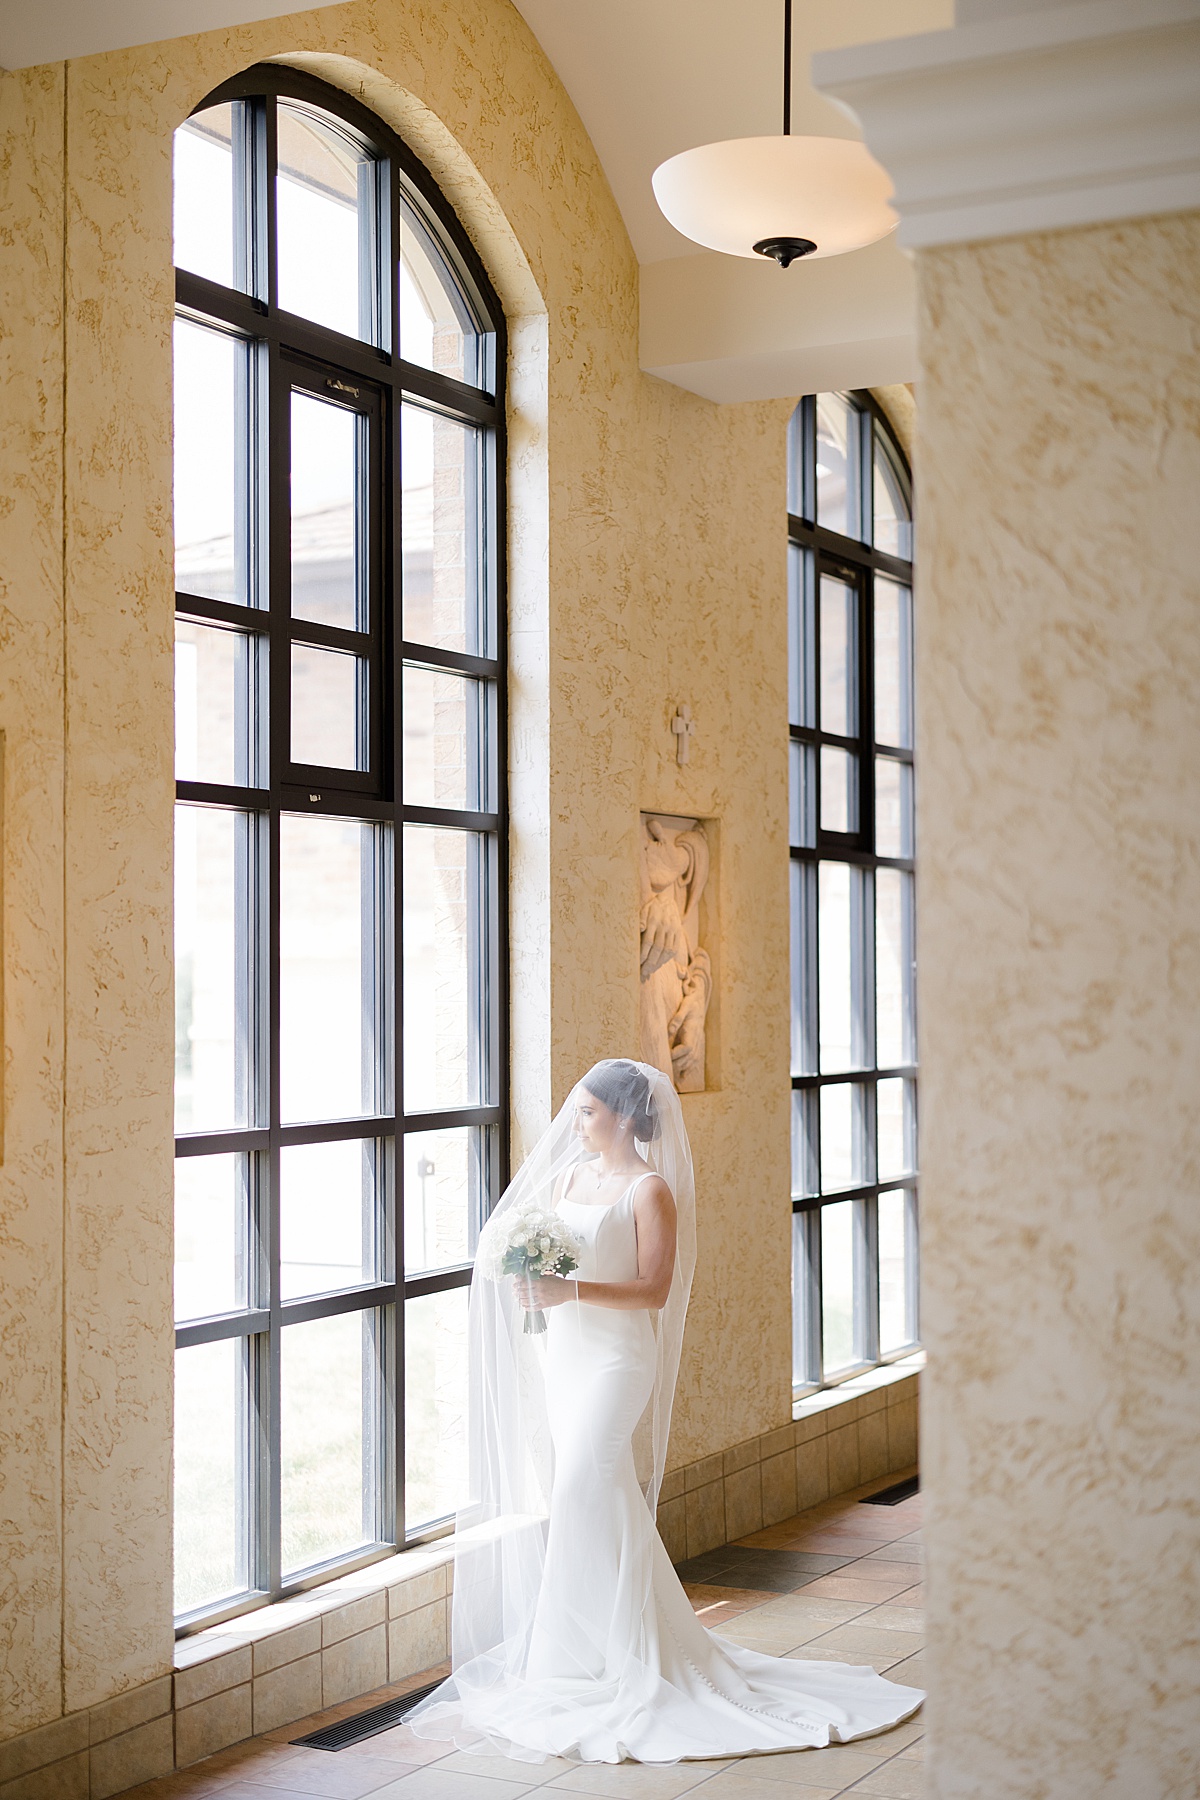 bride in minimalistic white gown poses by window before heartfelt Catholic ceremony